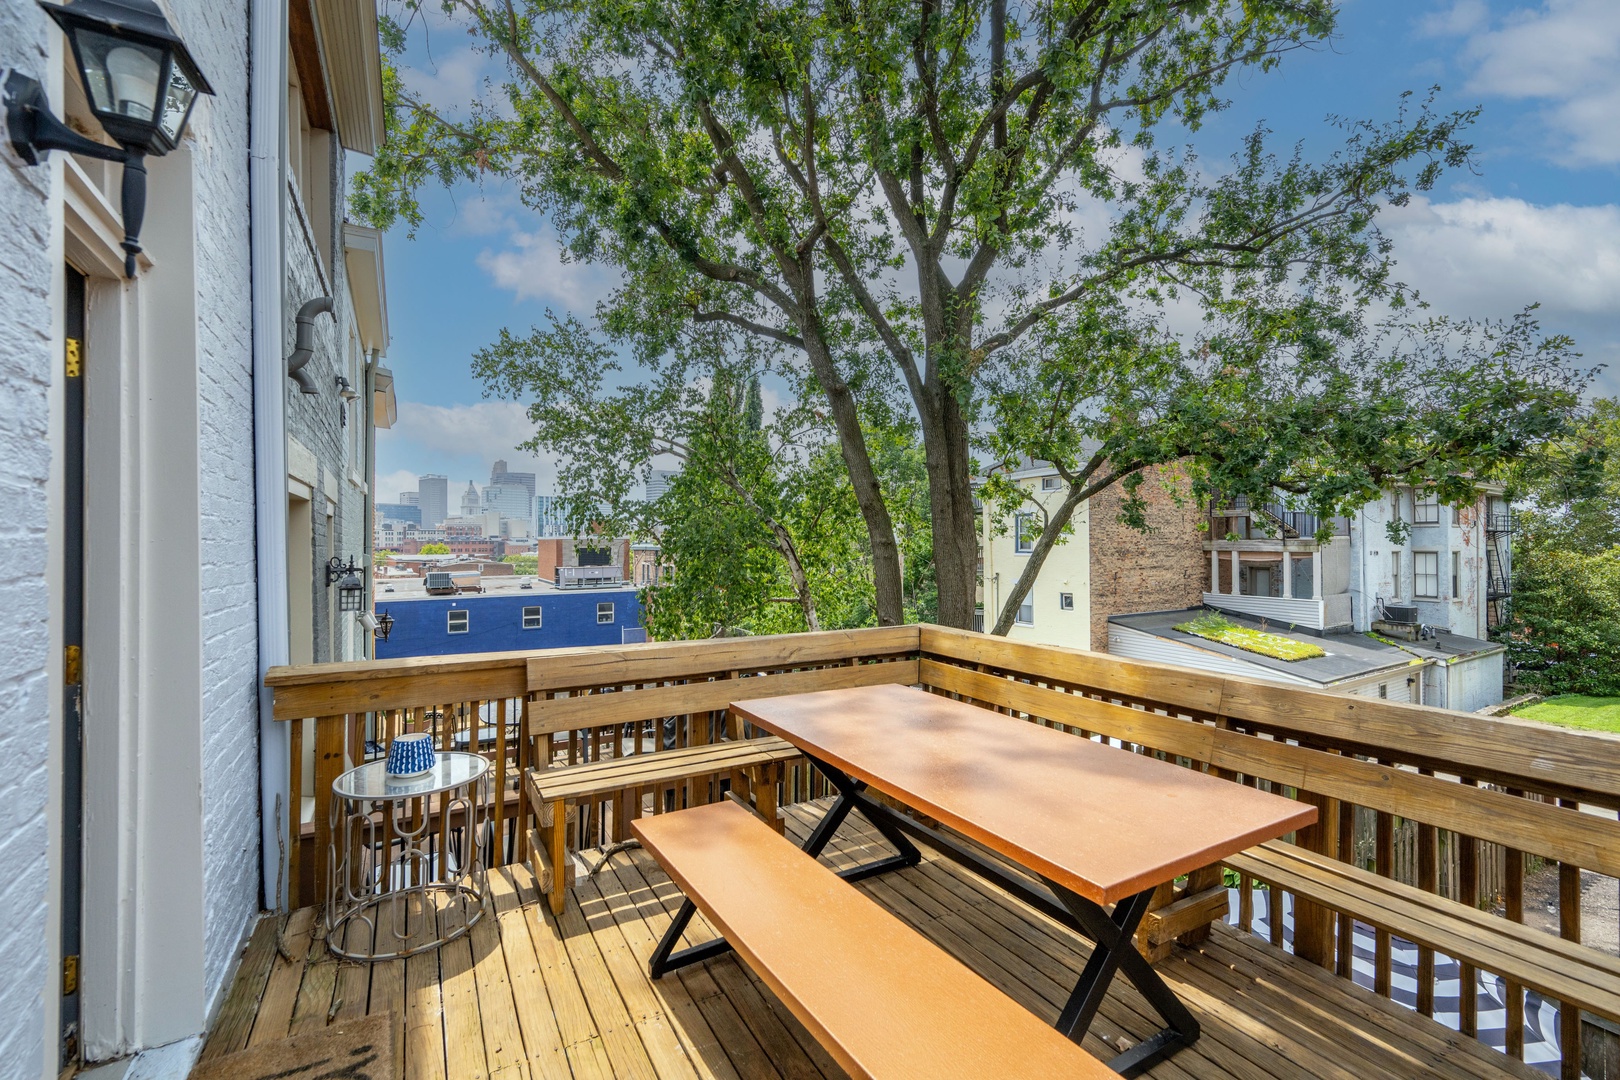 Lounge the day away or dine alfresco on the sunny back deck